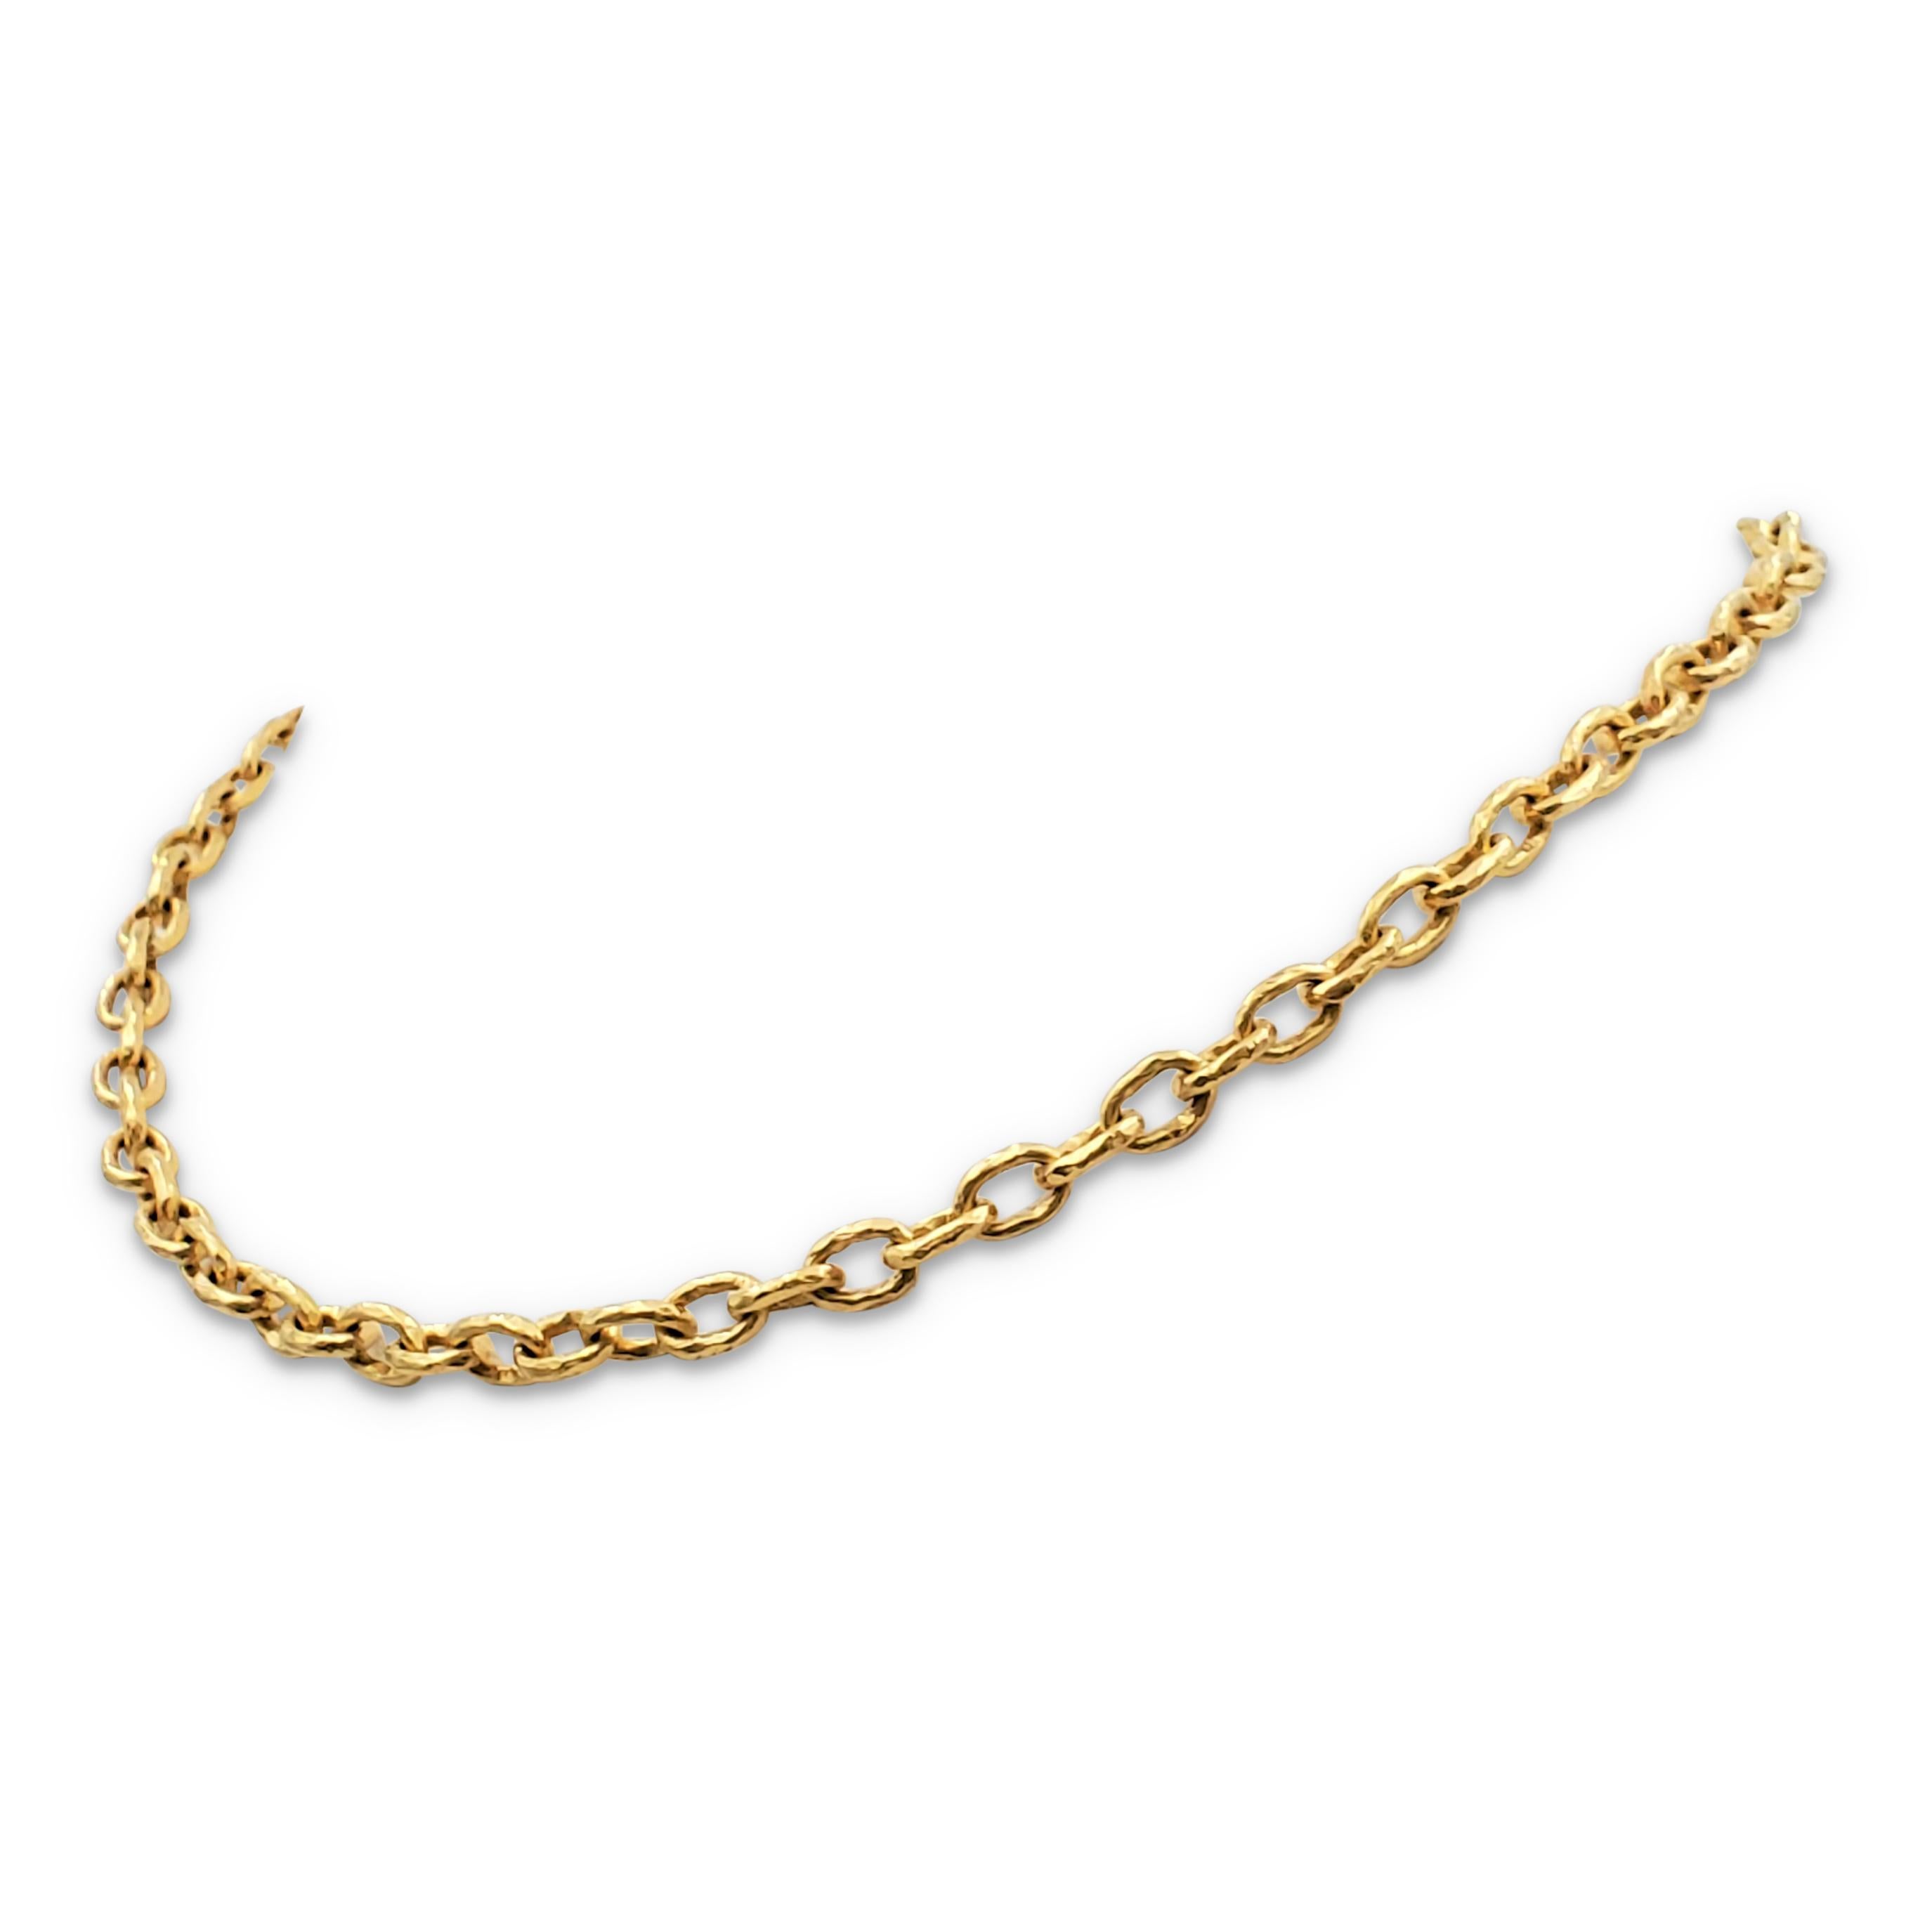 Authentic Elizabeth Locke necklace crafted in lustrous hammered 19 karat gold is comprised of interlocking round links. Granulated end-caps detail the toggle closure. Signed EL, 19K. The necklace measures 17 inches in length. Not presented with the